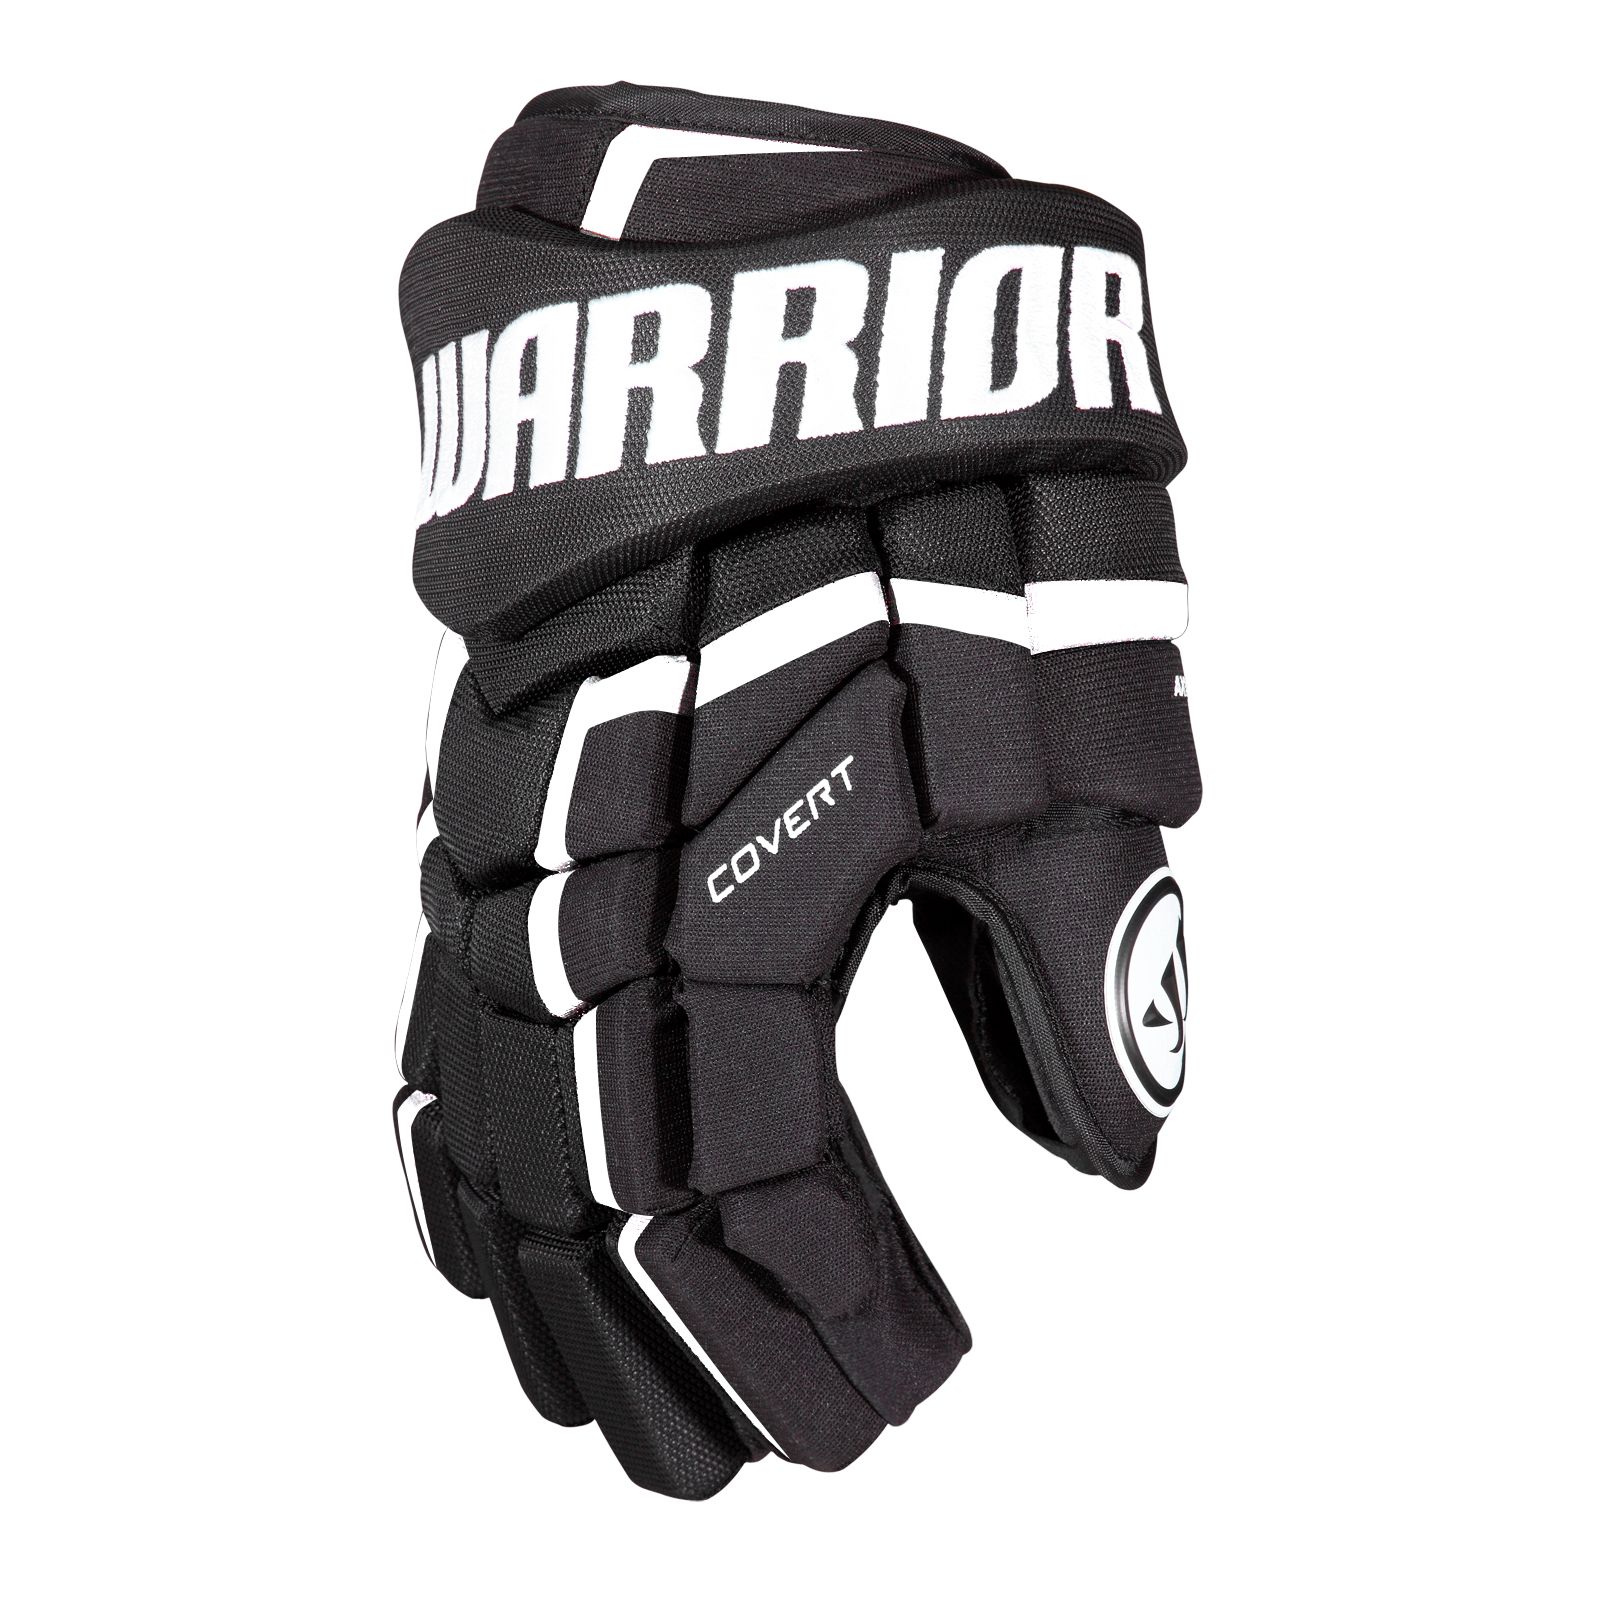 Covert QRL4 Sr. Glove , Black with White image number 0